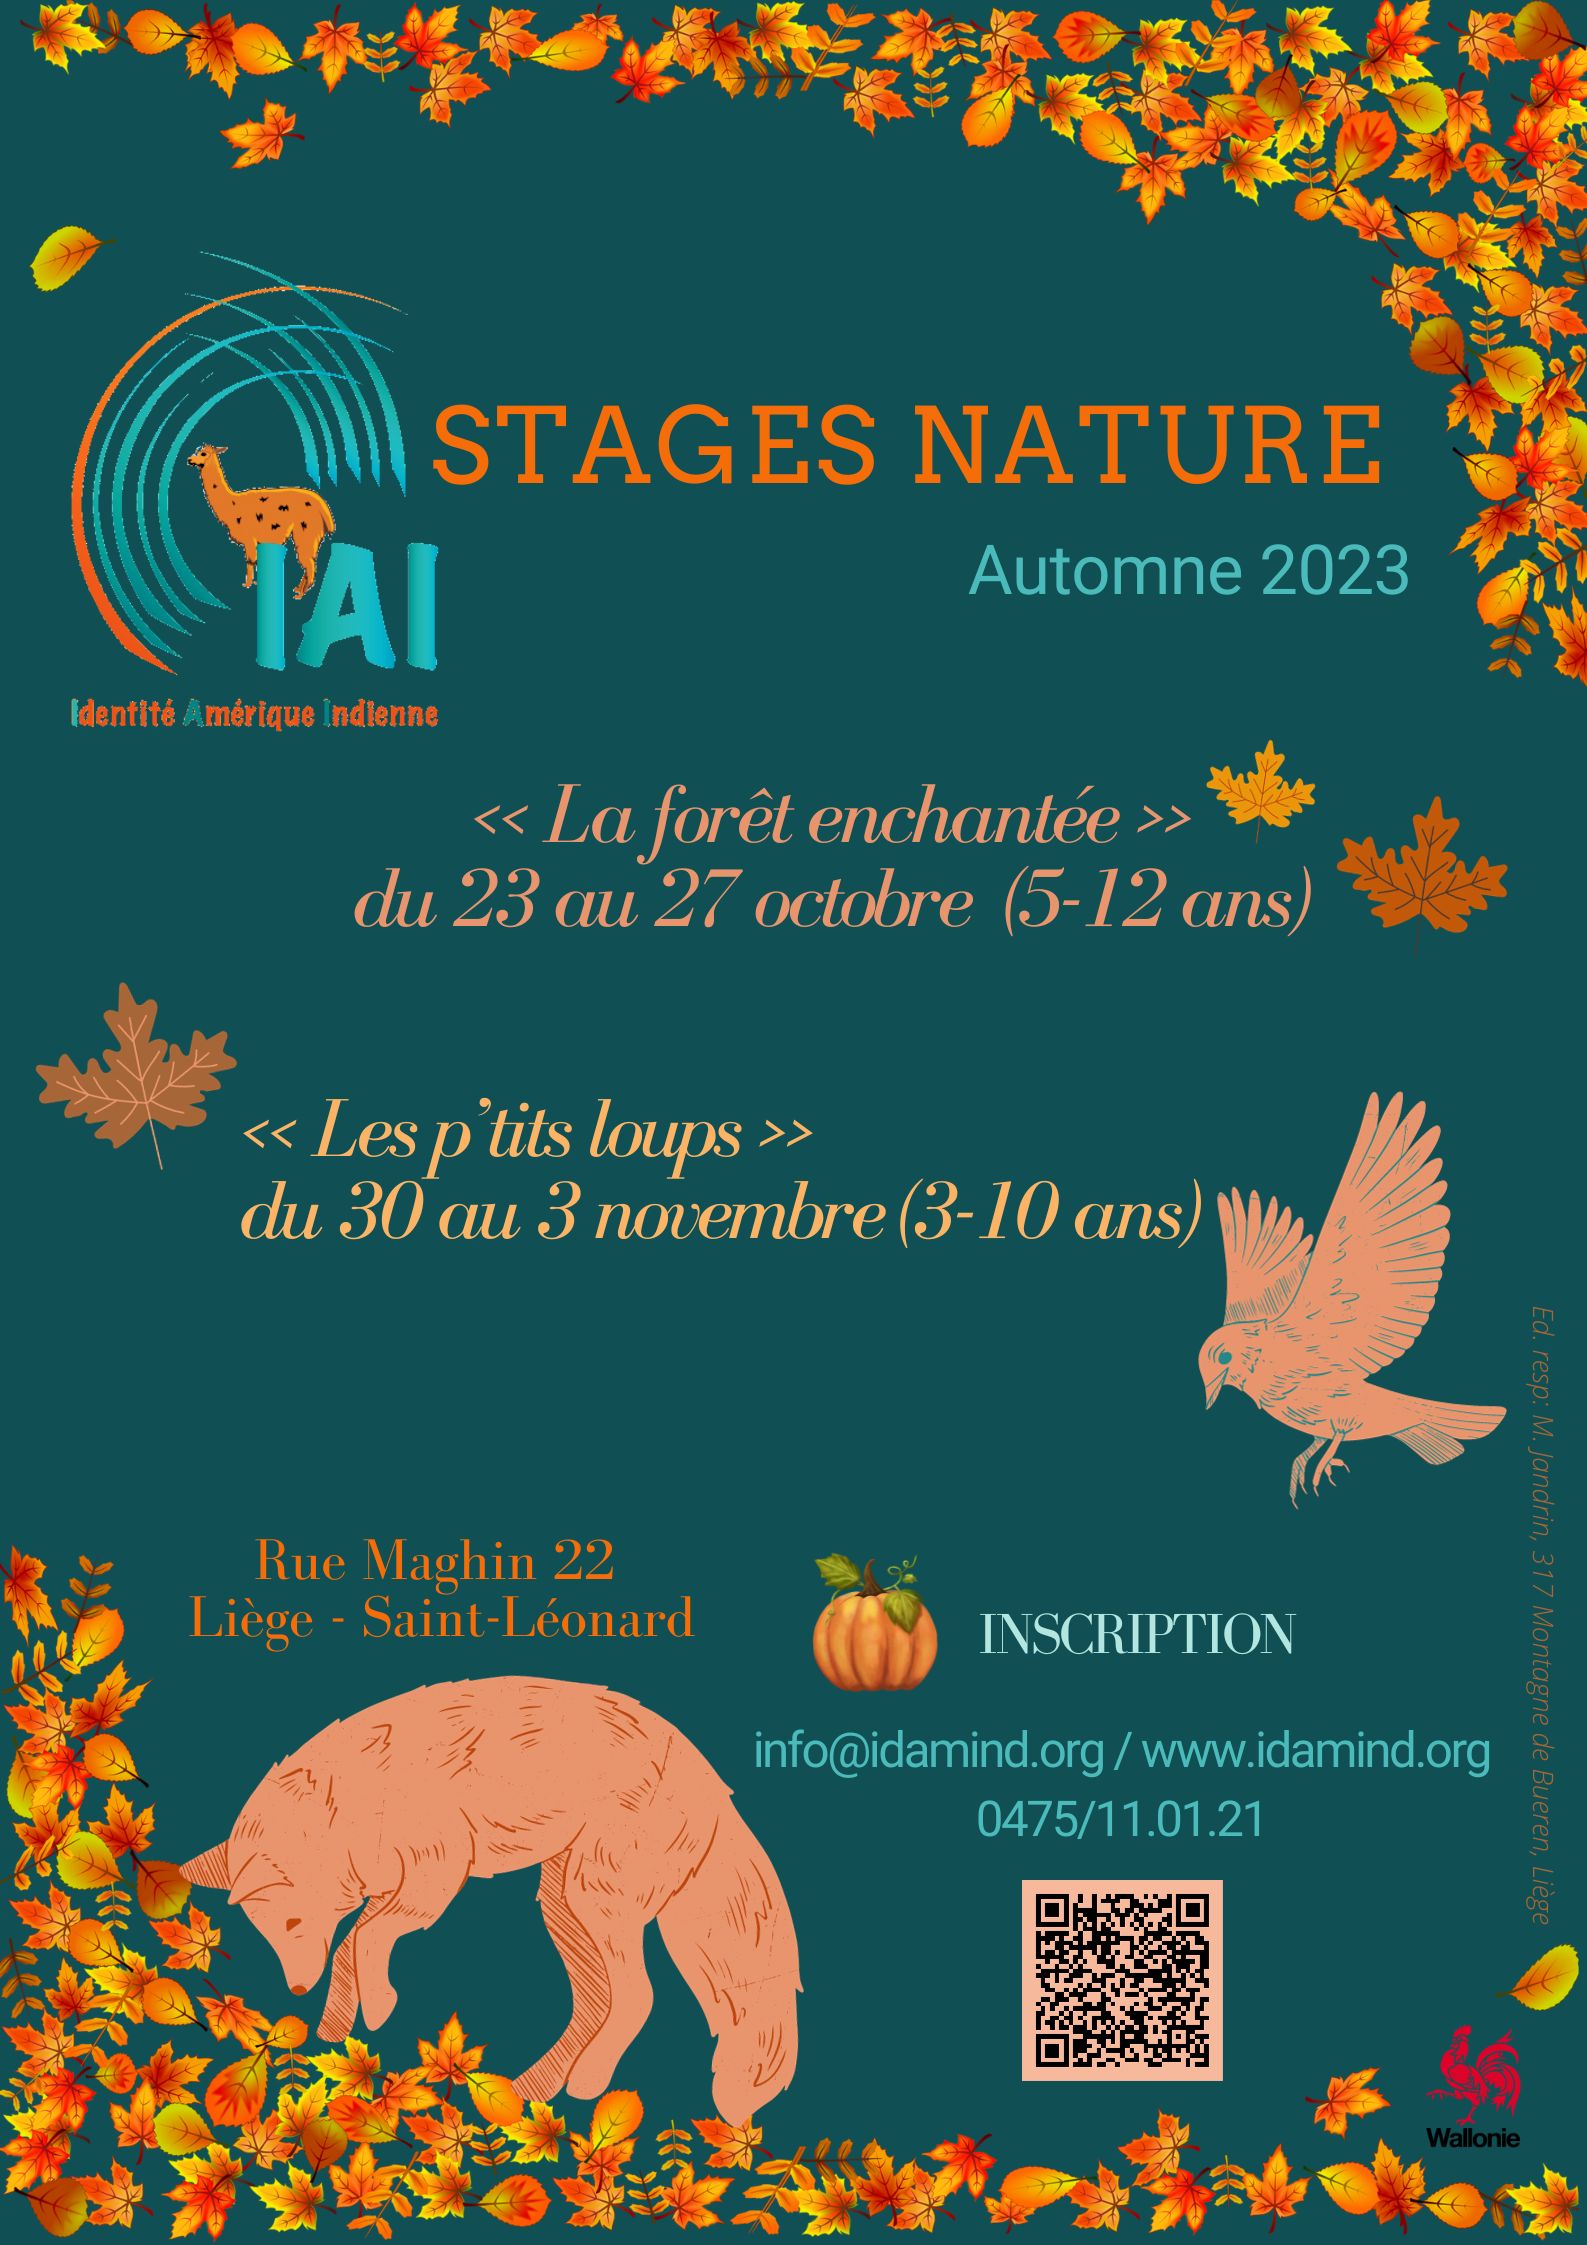 Stages nature automne 2023 